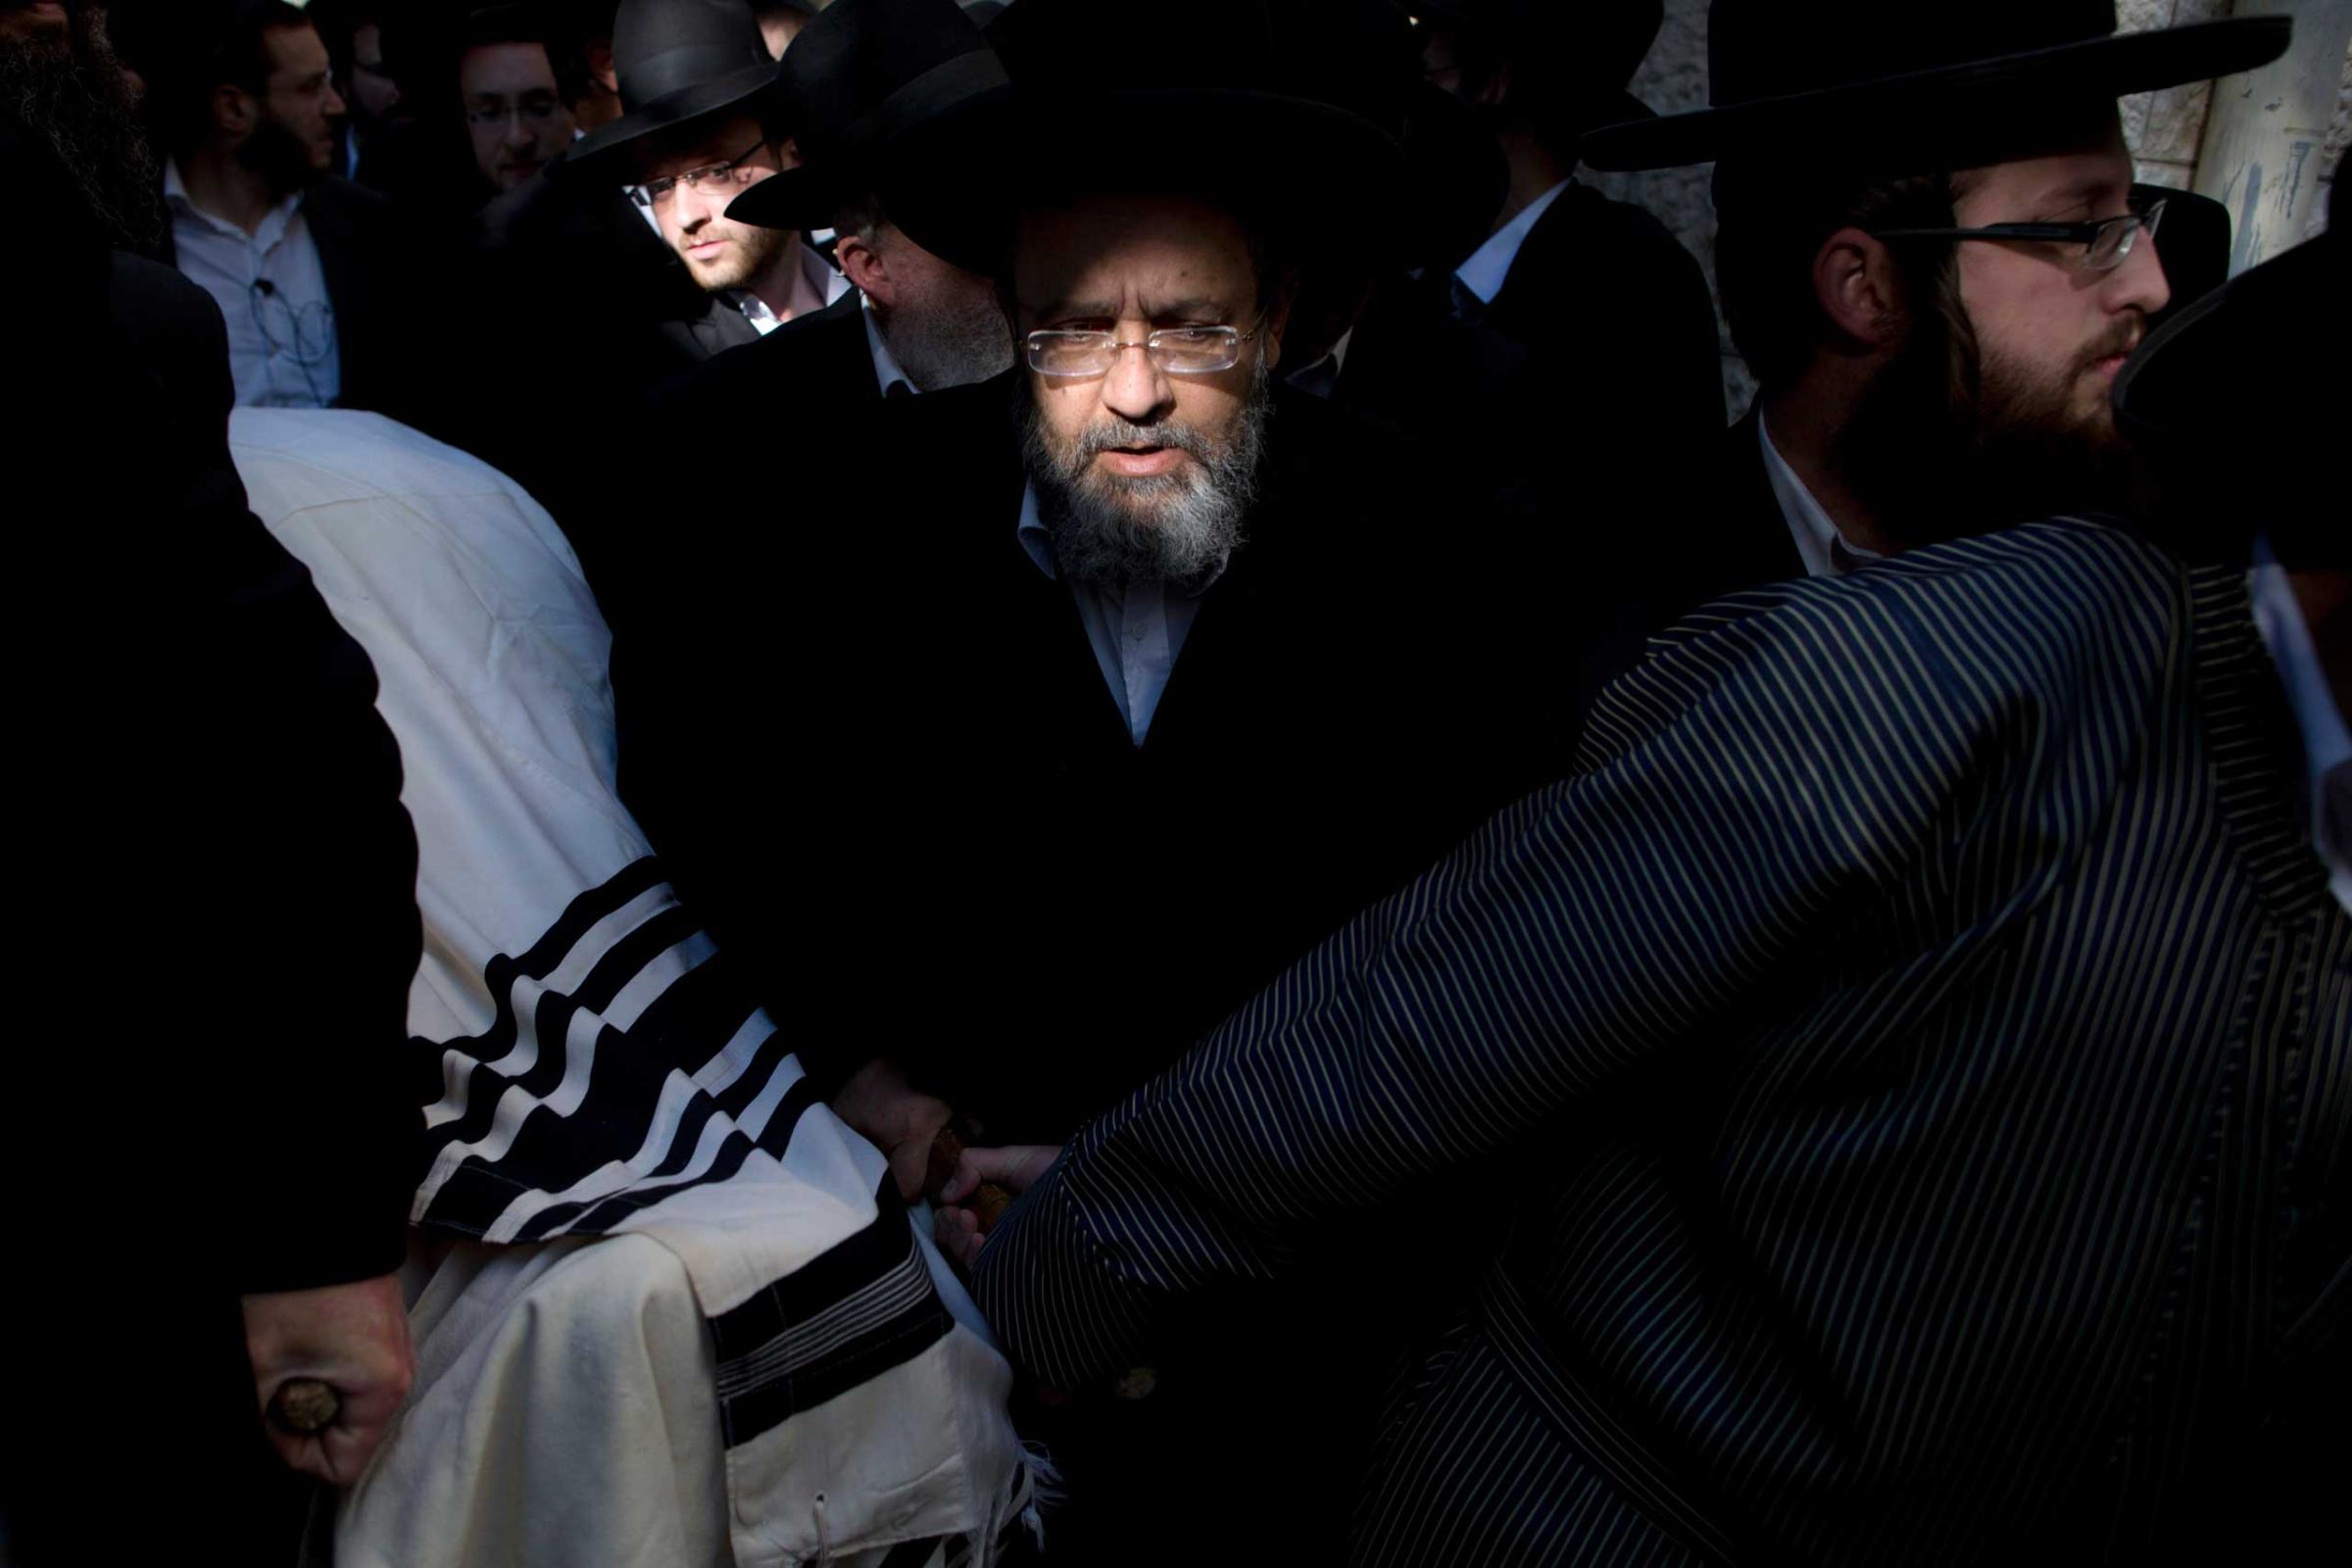 Ultra-Orthodox Jews carry the body of Mosheh Twersky during his funeral in Jerusalem, Nov. 18, 2014.